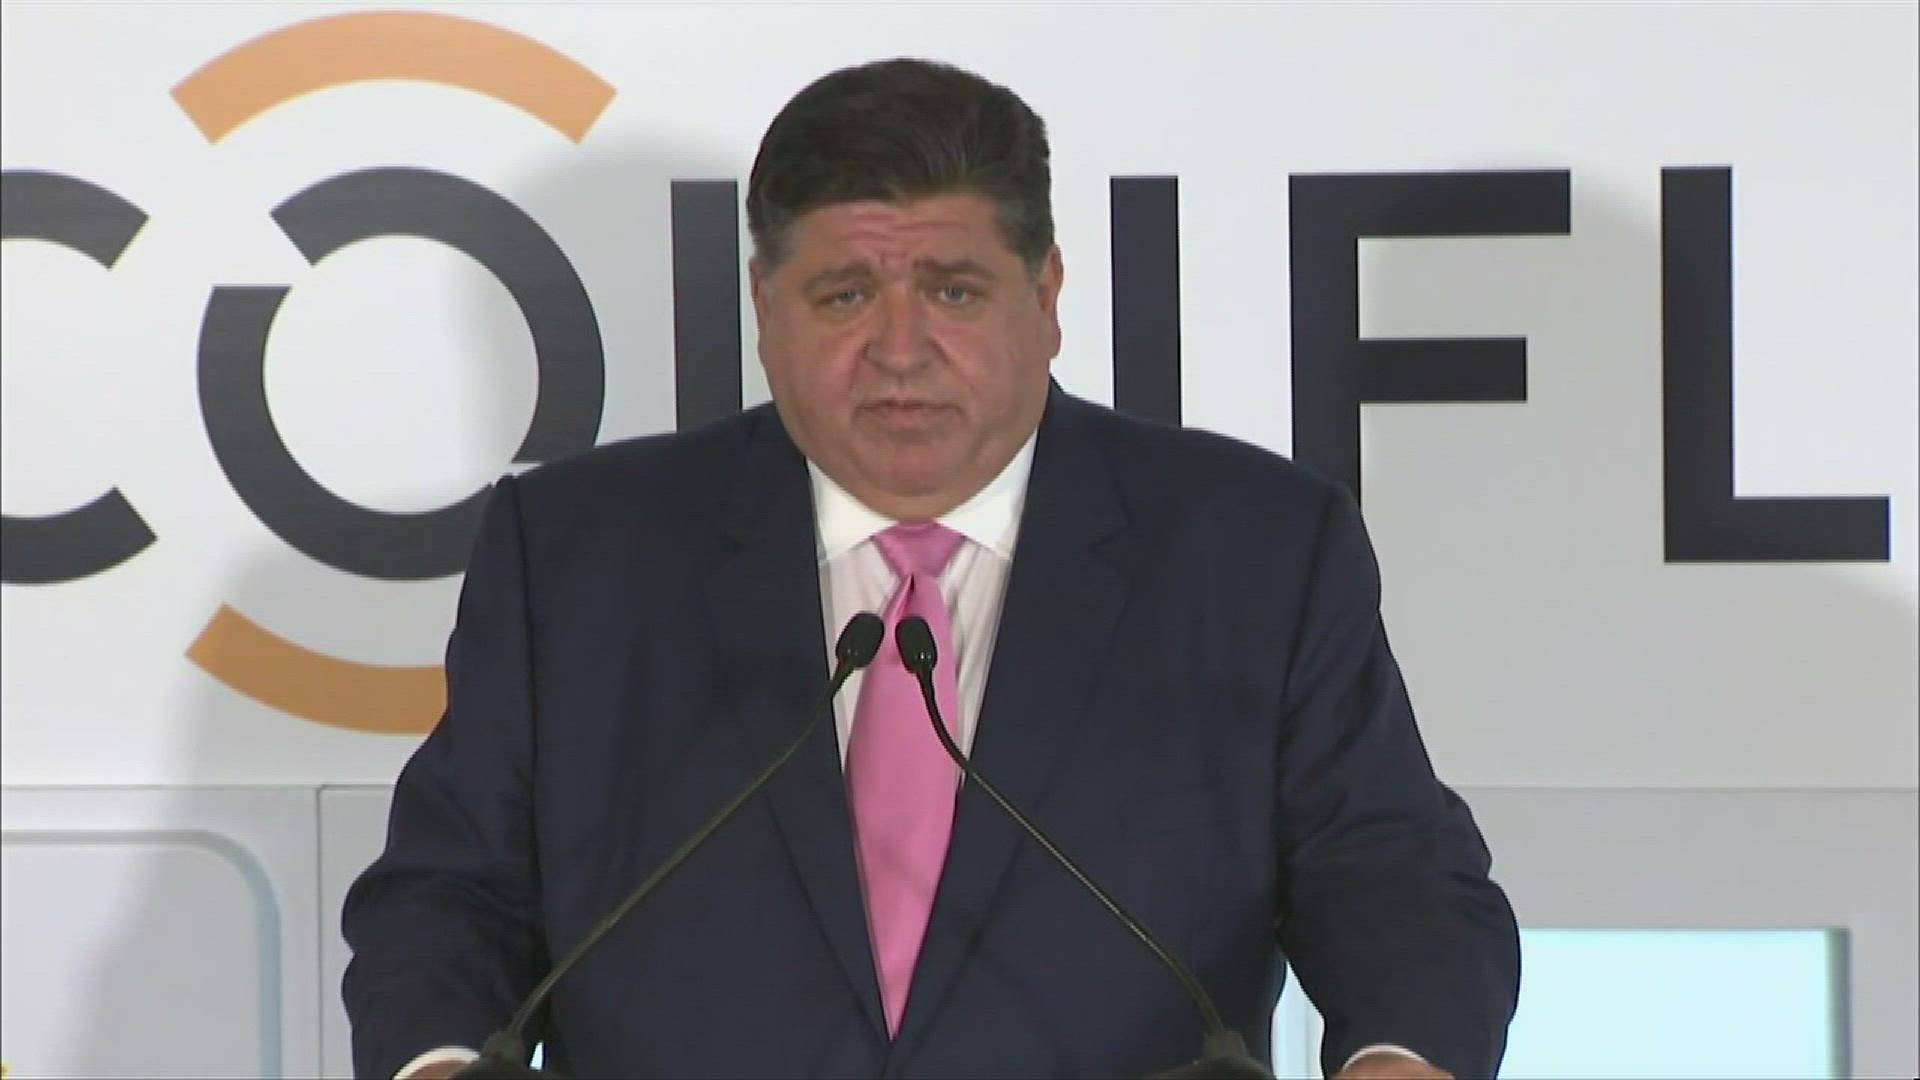 In light of COVID hospitalizations surging, Pritzker said that restrictions may have to be re-implemented if the stress on hospitals becomes too great.